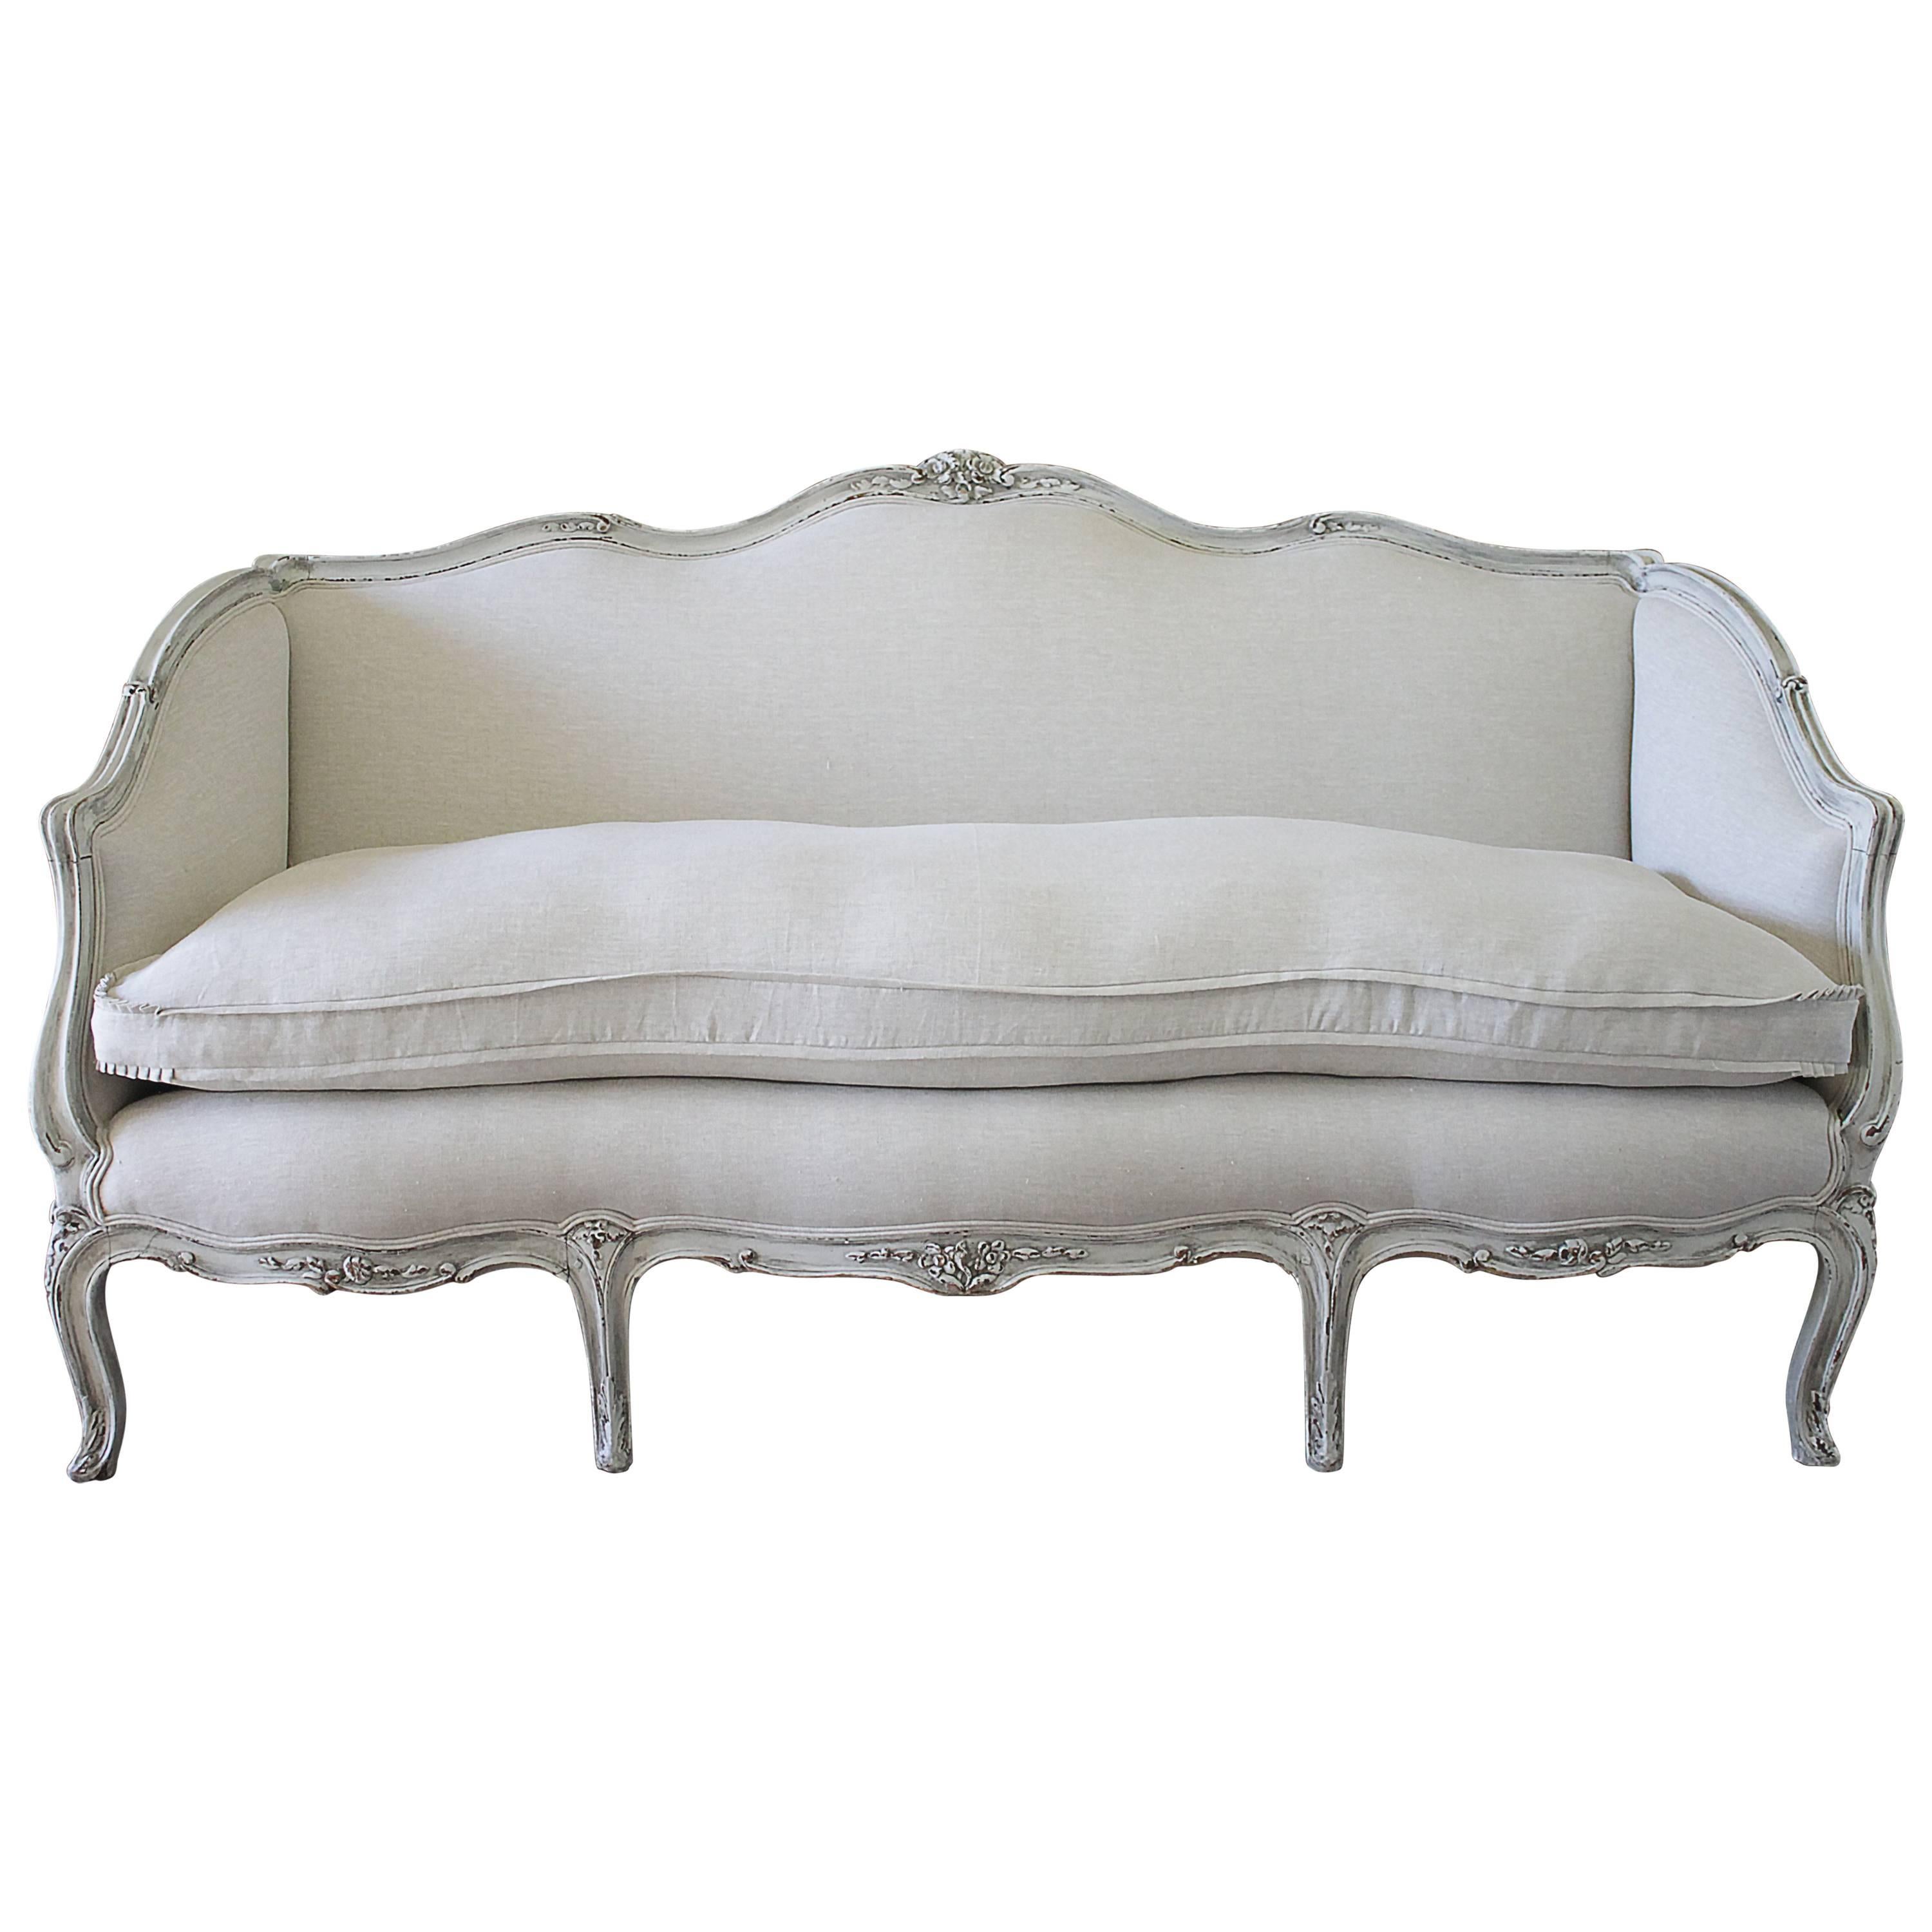 19th Century Carved and Painted Louis XV Style Sofa Upholstered in Organic Linen